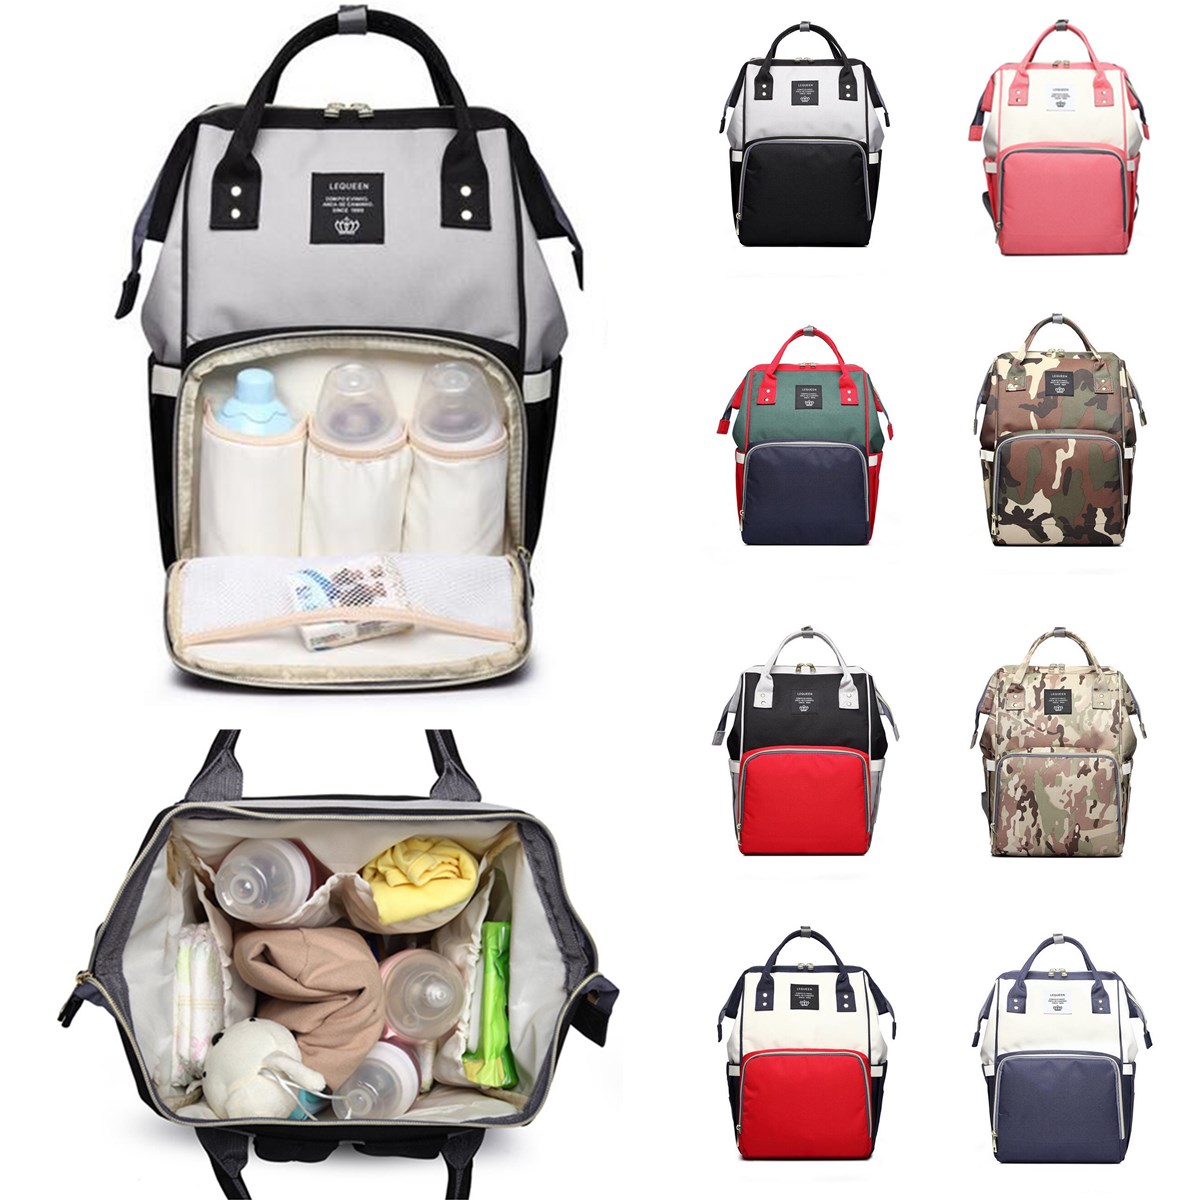 

16L Mummy Backpack Baby Nappy Diaper Bag Large Capacity Storage Pouch Outdoor Travel